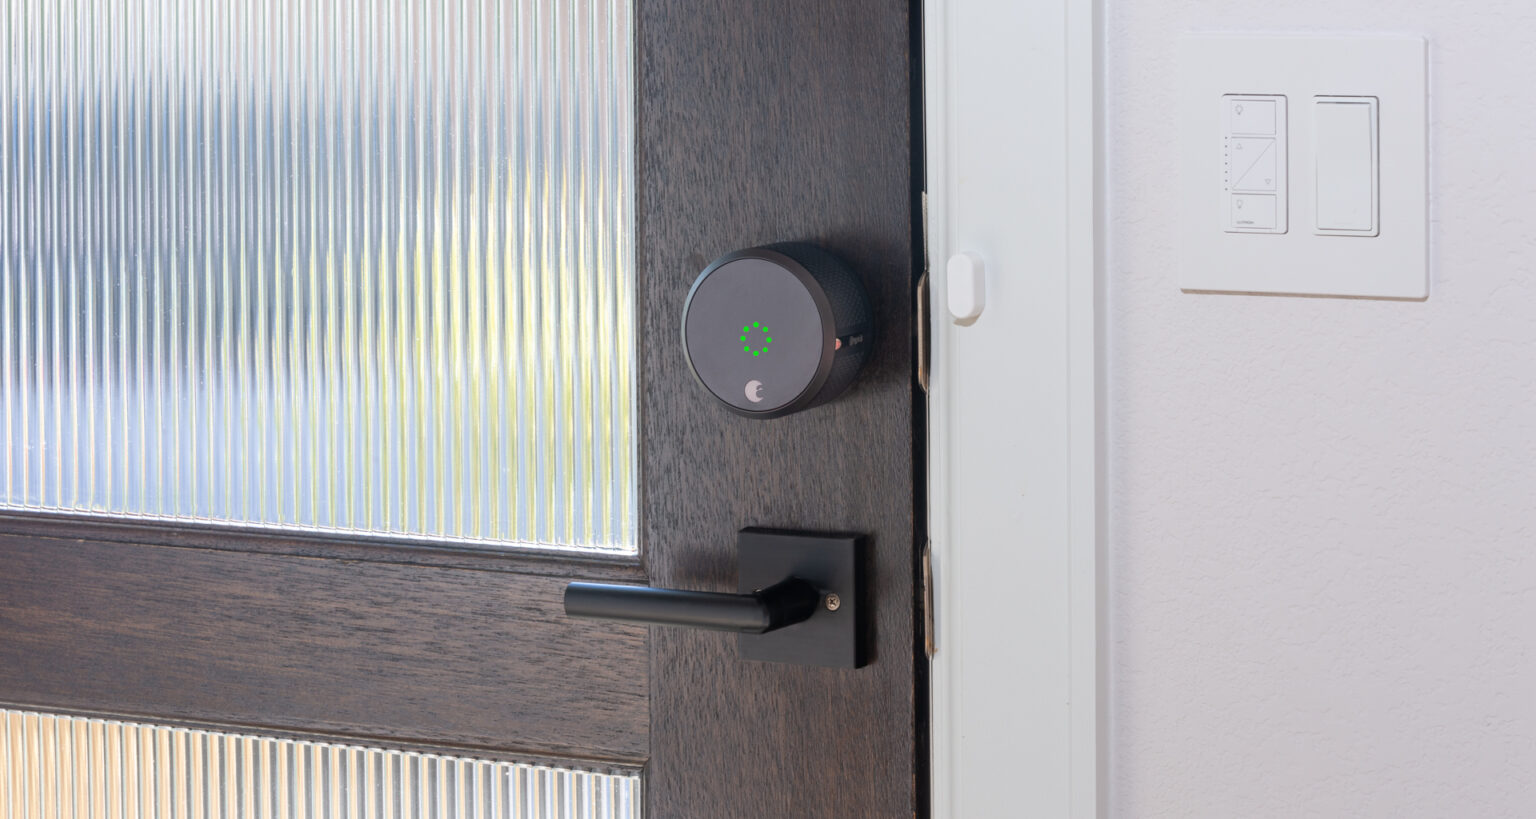 Our testing setup for the August Smart Lock Pro. Image: Digitized House.